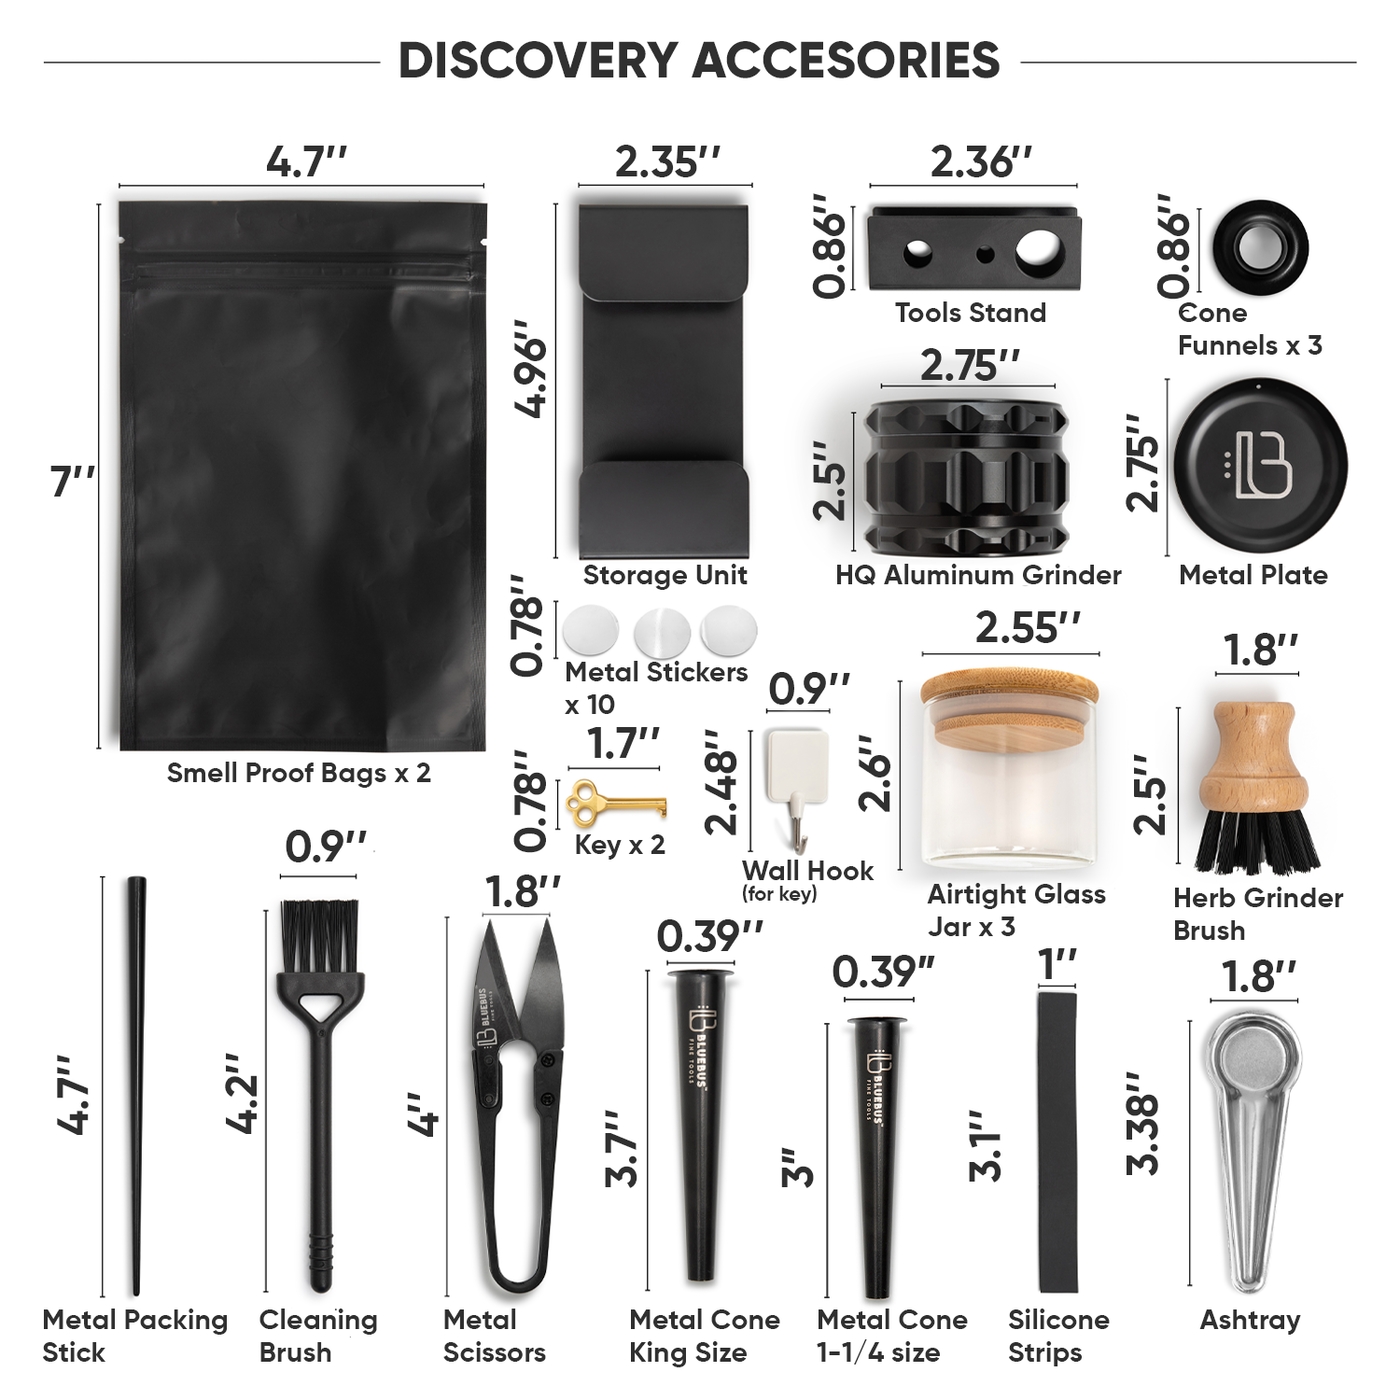 all discovery accesories included in product